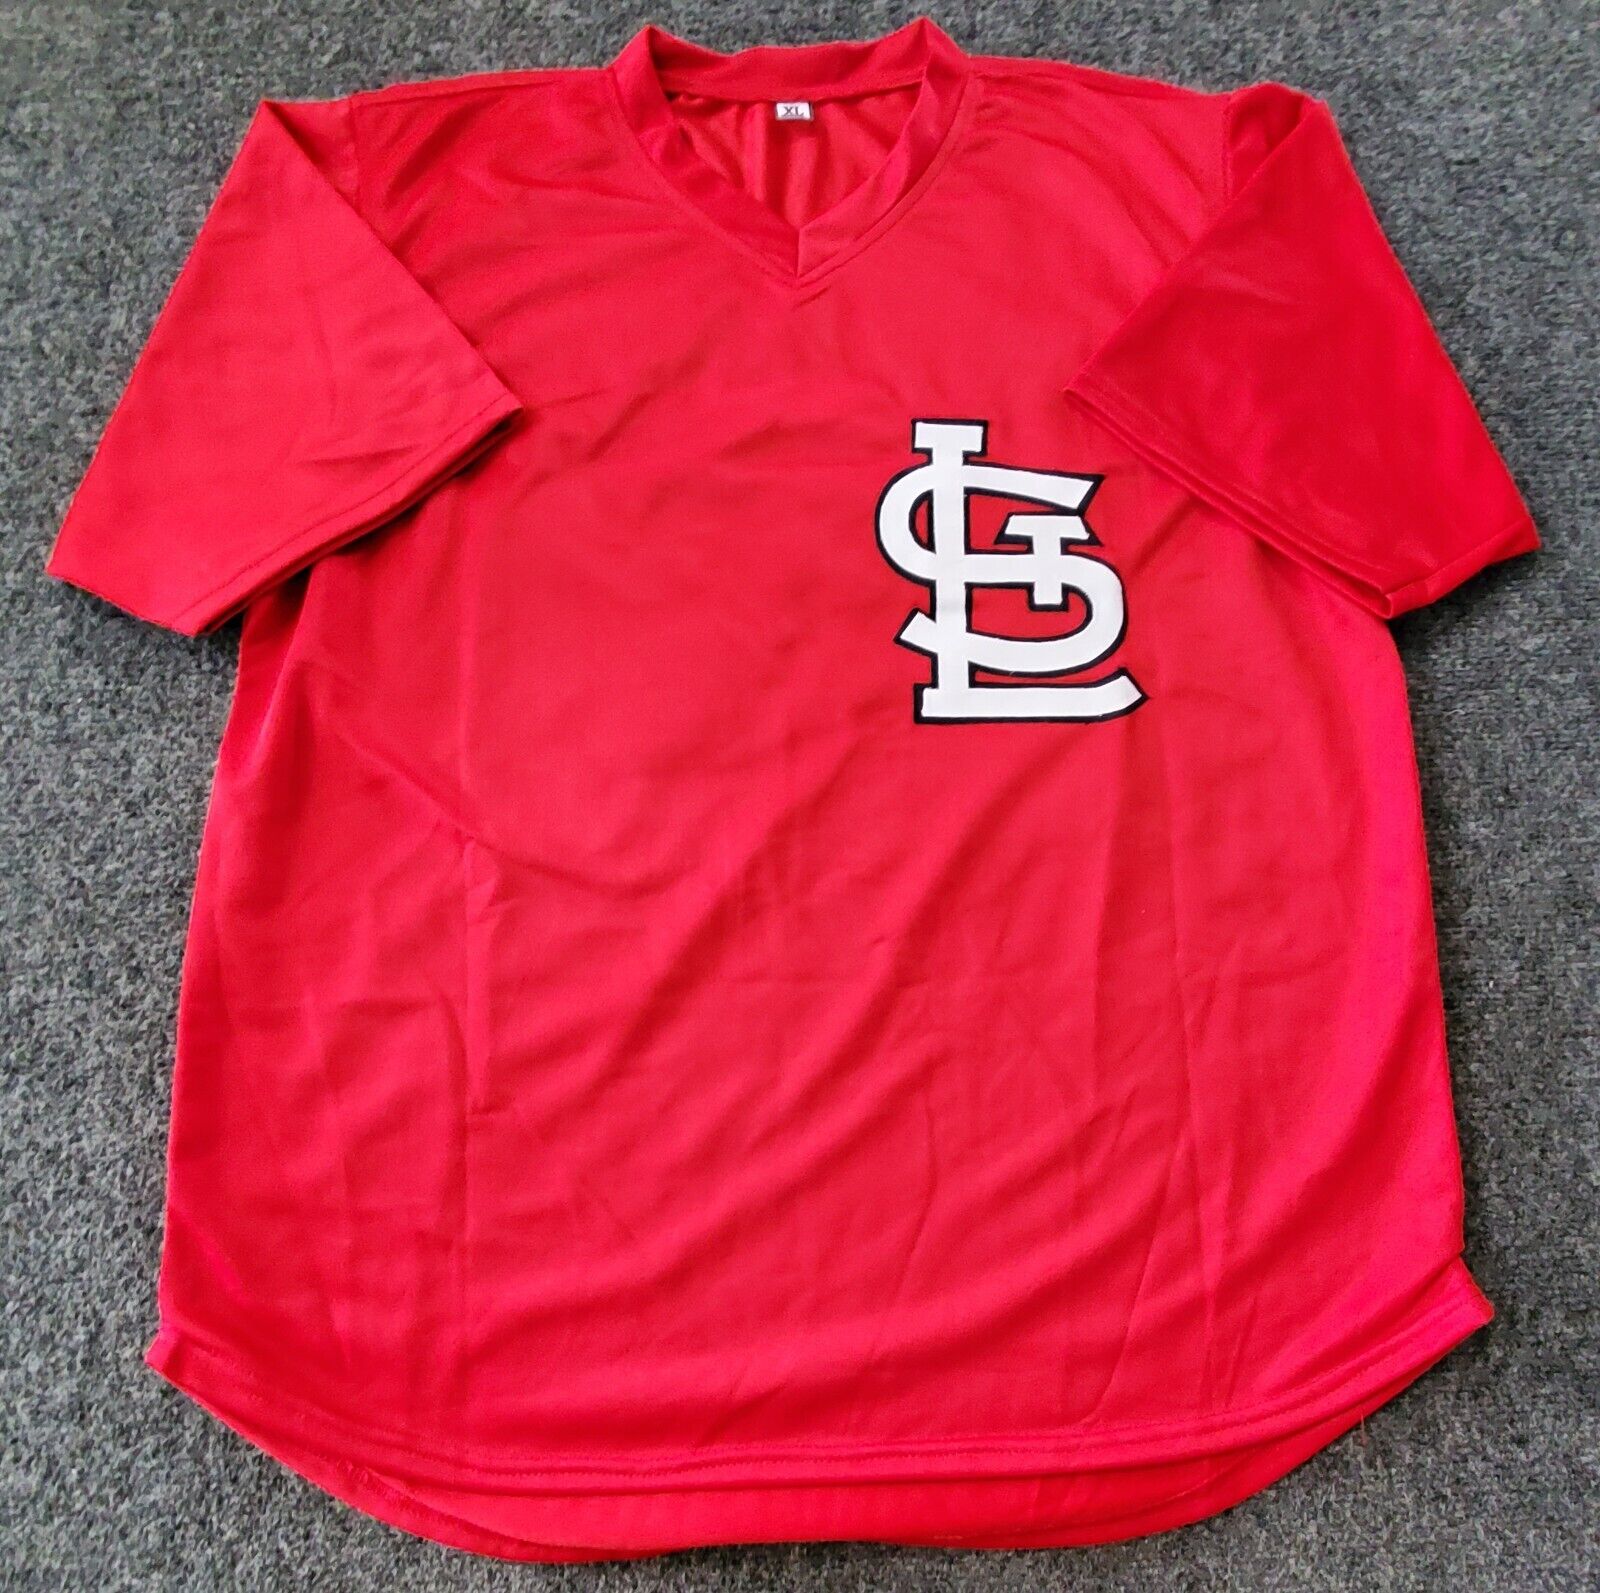 MLB St. Louis Cardinals Mix Jersey Personalized Style Polo Shirt